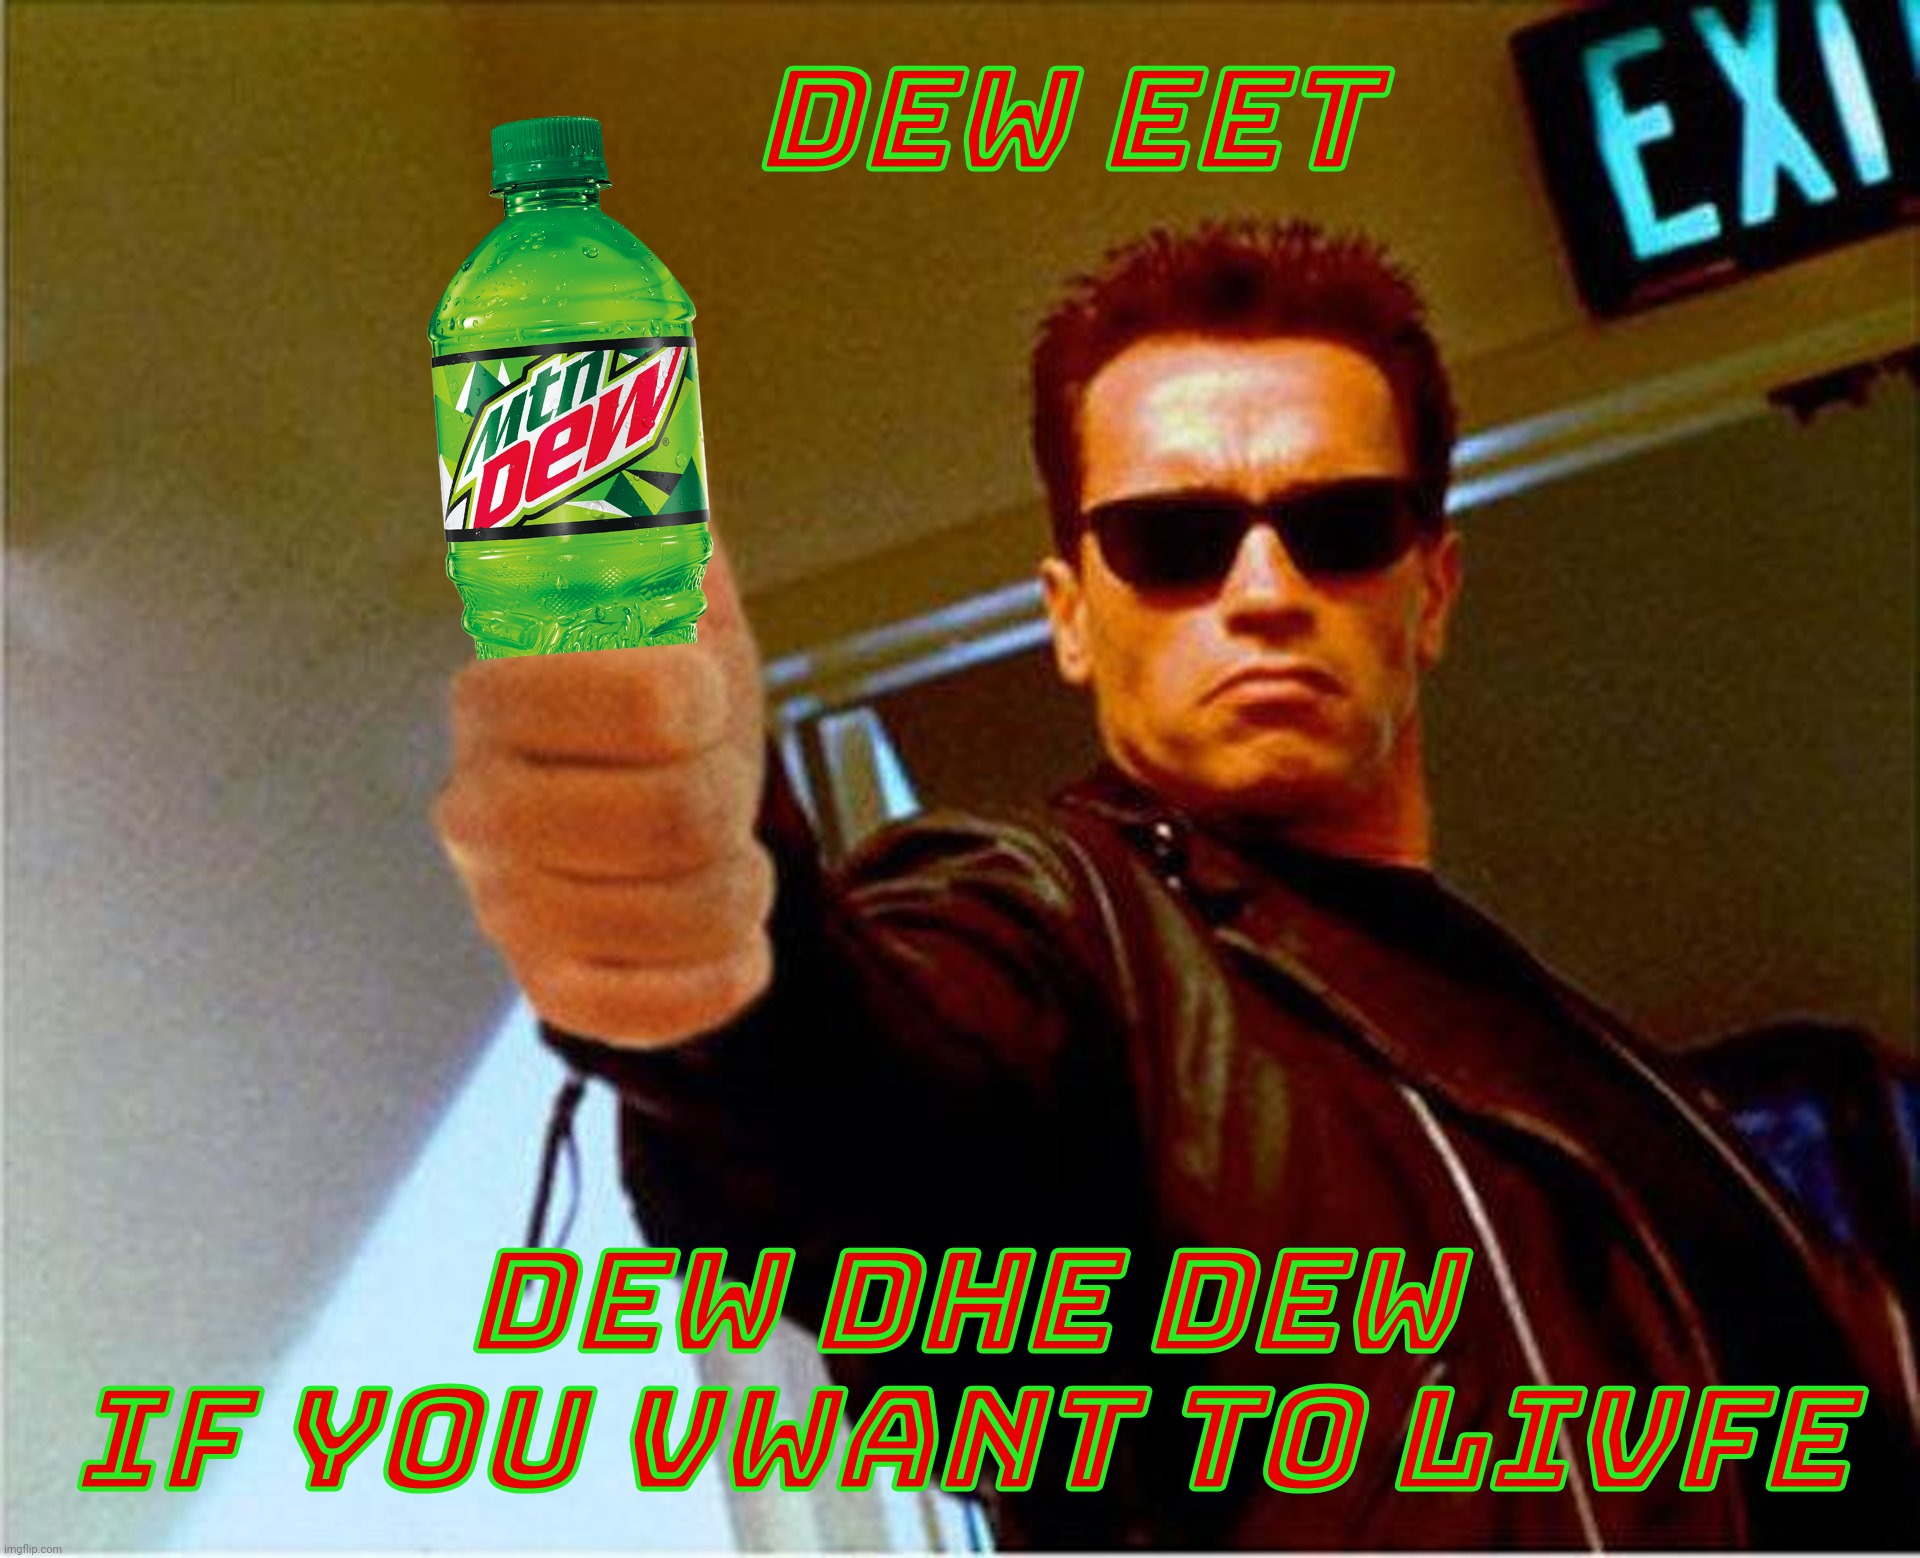 You will dew what the Dewminator tells you to dew | DEW EET DEW DHE DEW
IF YOU VWANT TO LIVFE | image tagged in terminator thumbs up,mountain dew,dew dhe dew,dew eet,dew dhe dew if you want to live | made w/ Imgflip meme maker